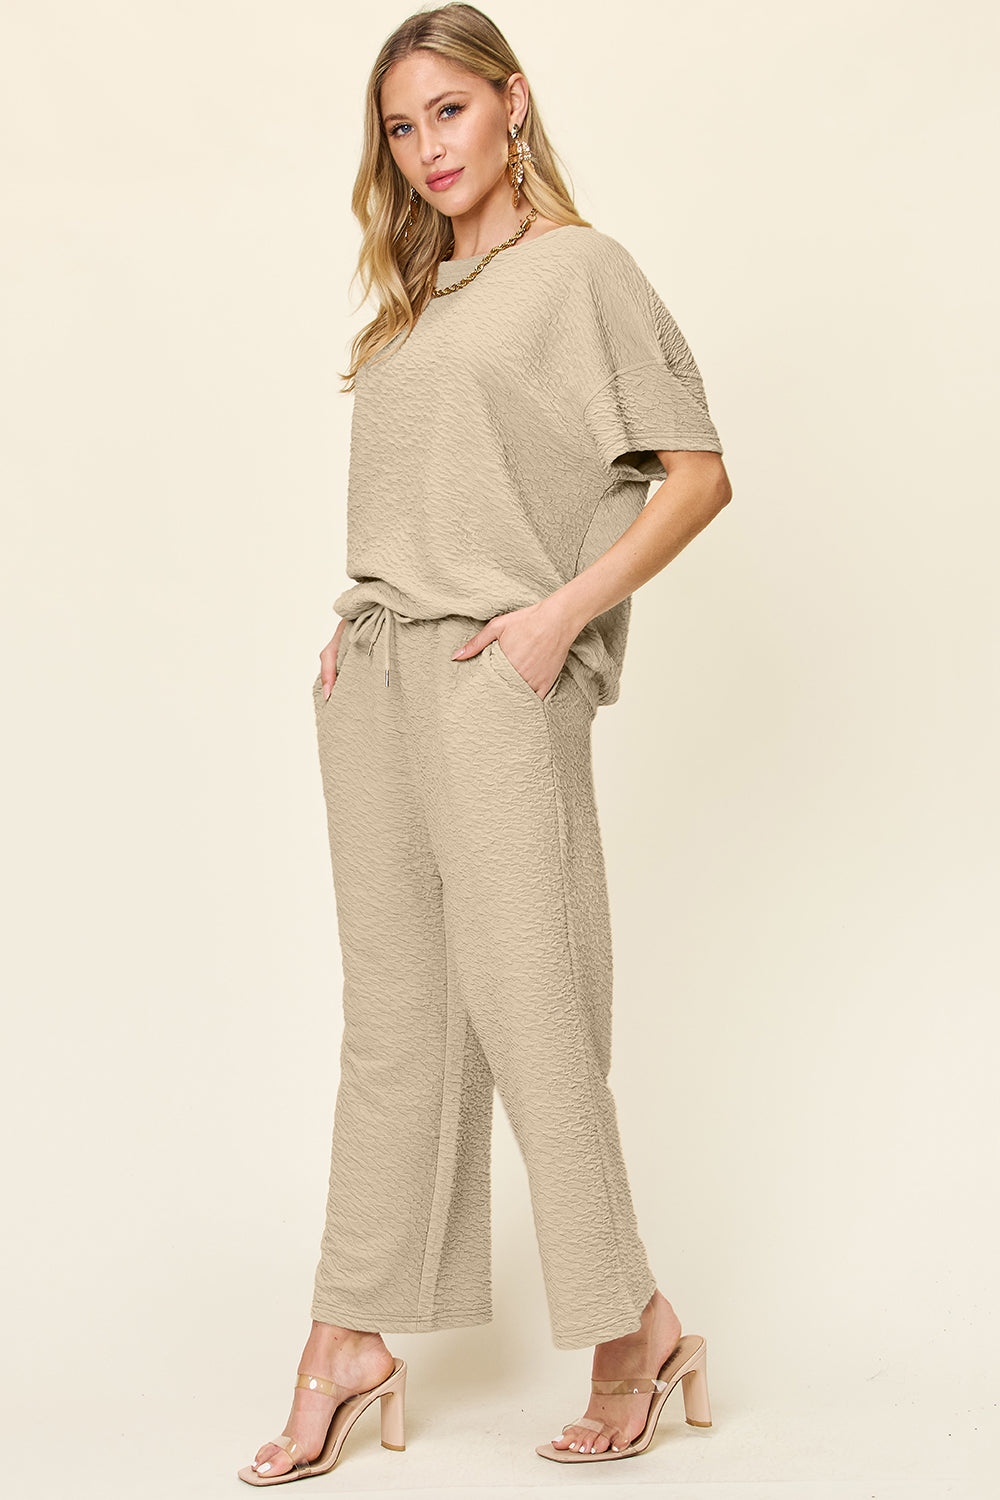 Textured Knit Short Sleeve Top and Pants Set